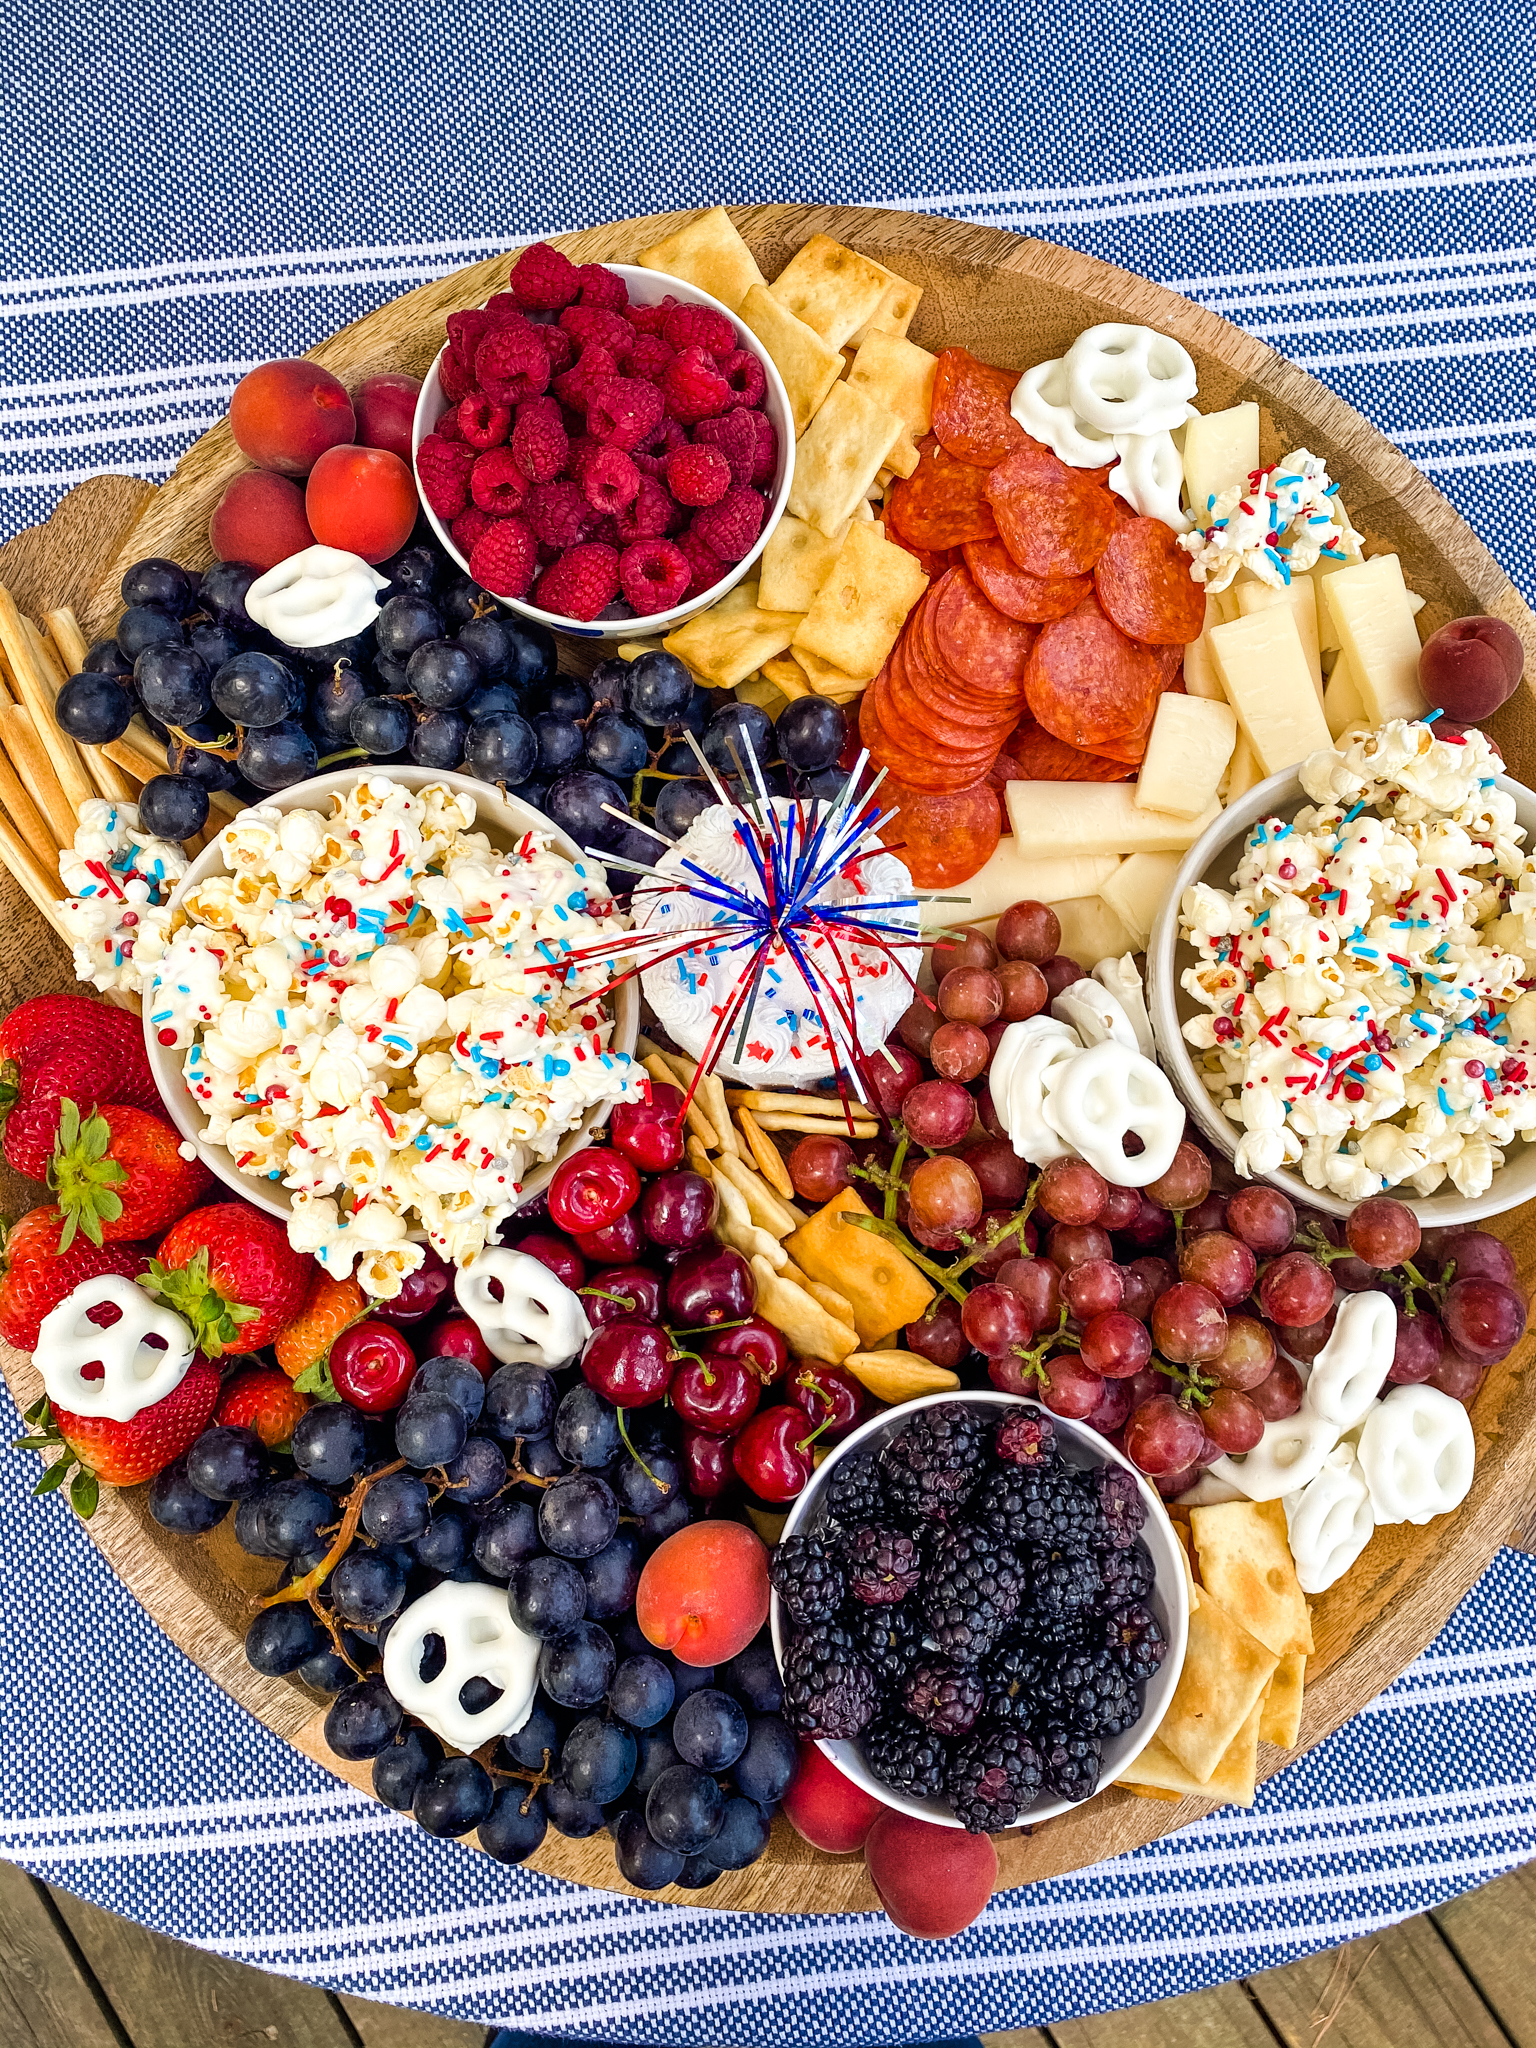 Red, white and blue charcuterie board with blue tablecloth.